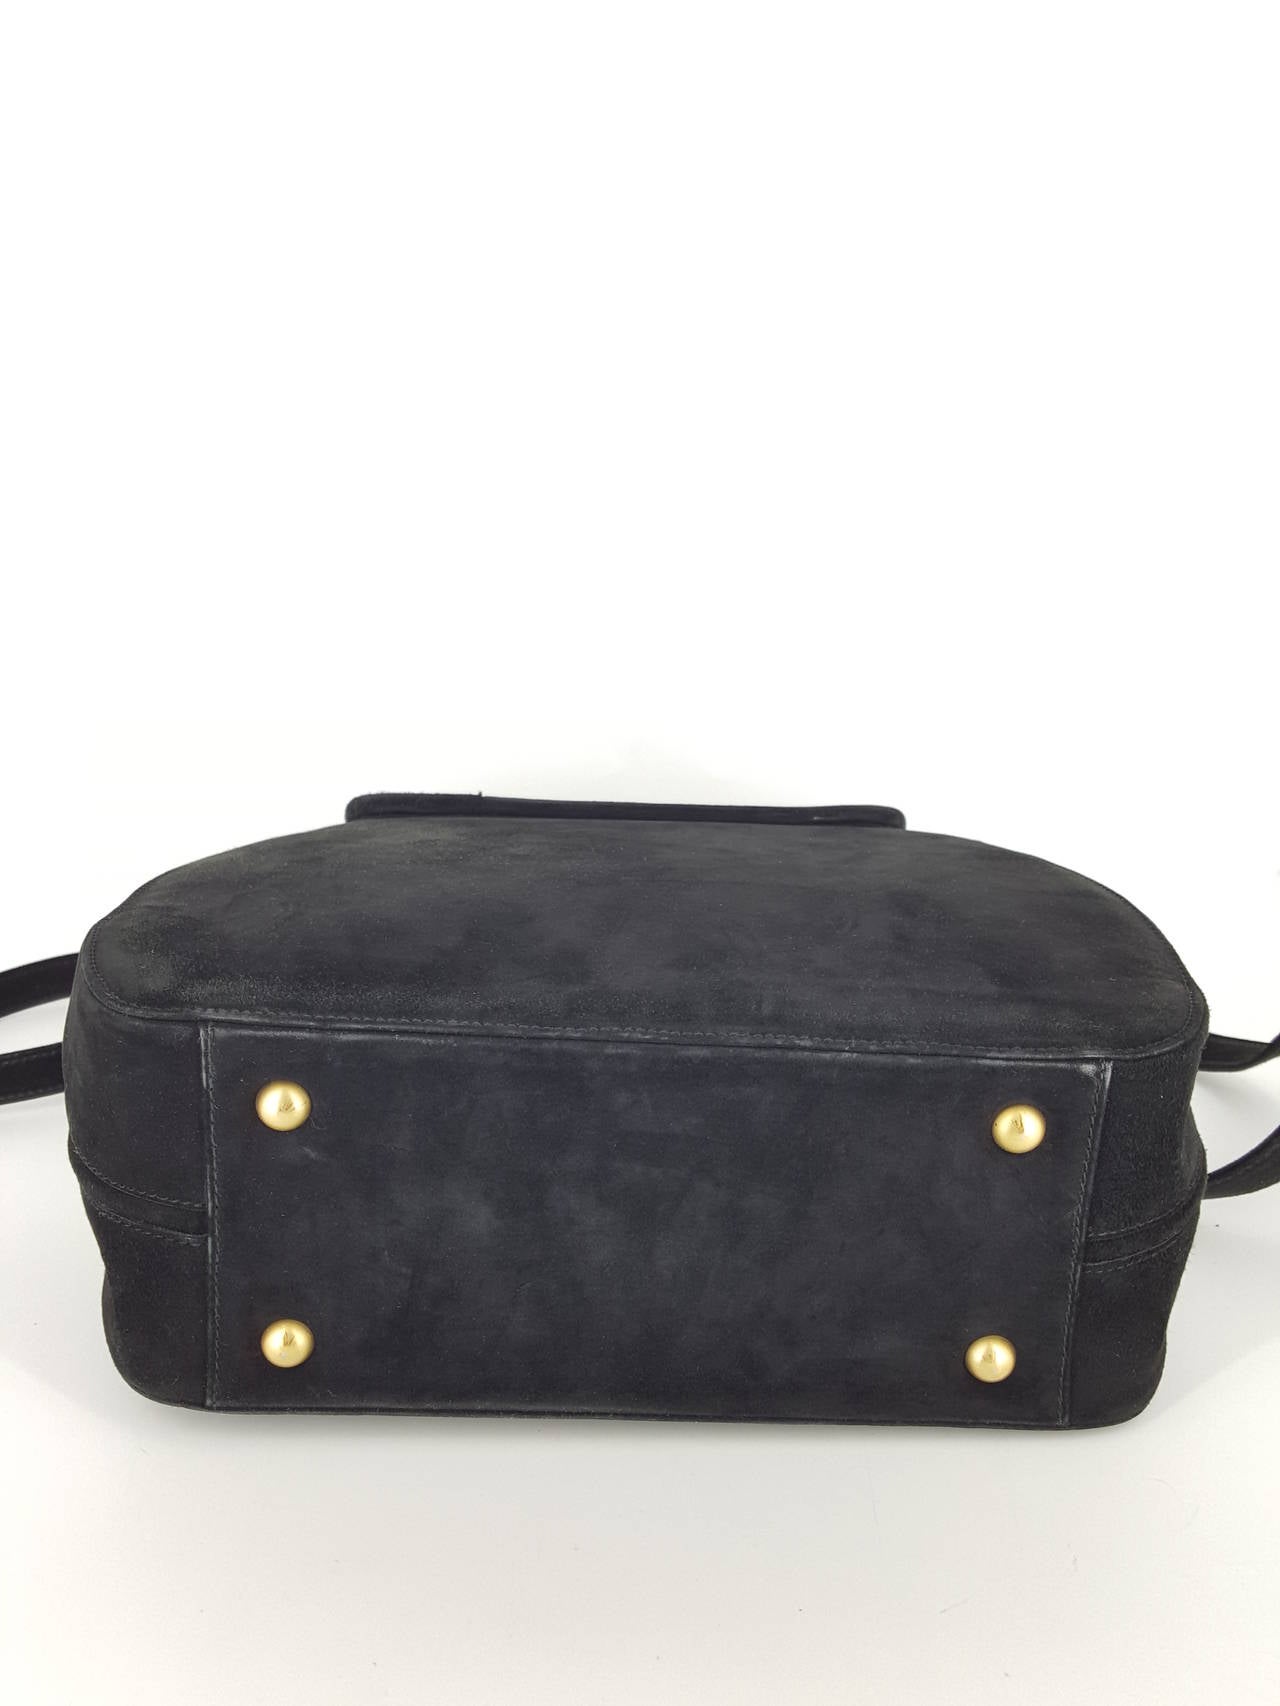 Kieselstein Cord Black Suede Large Trophy Bag With Labrador Closure. In Excellent Condition For Sale In Delray Beach, FL